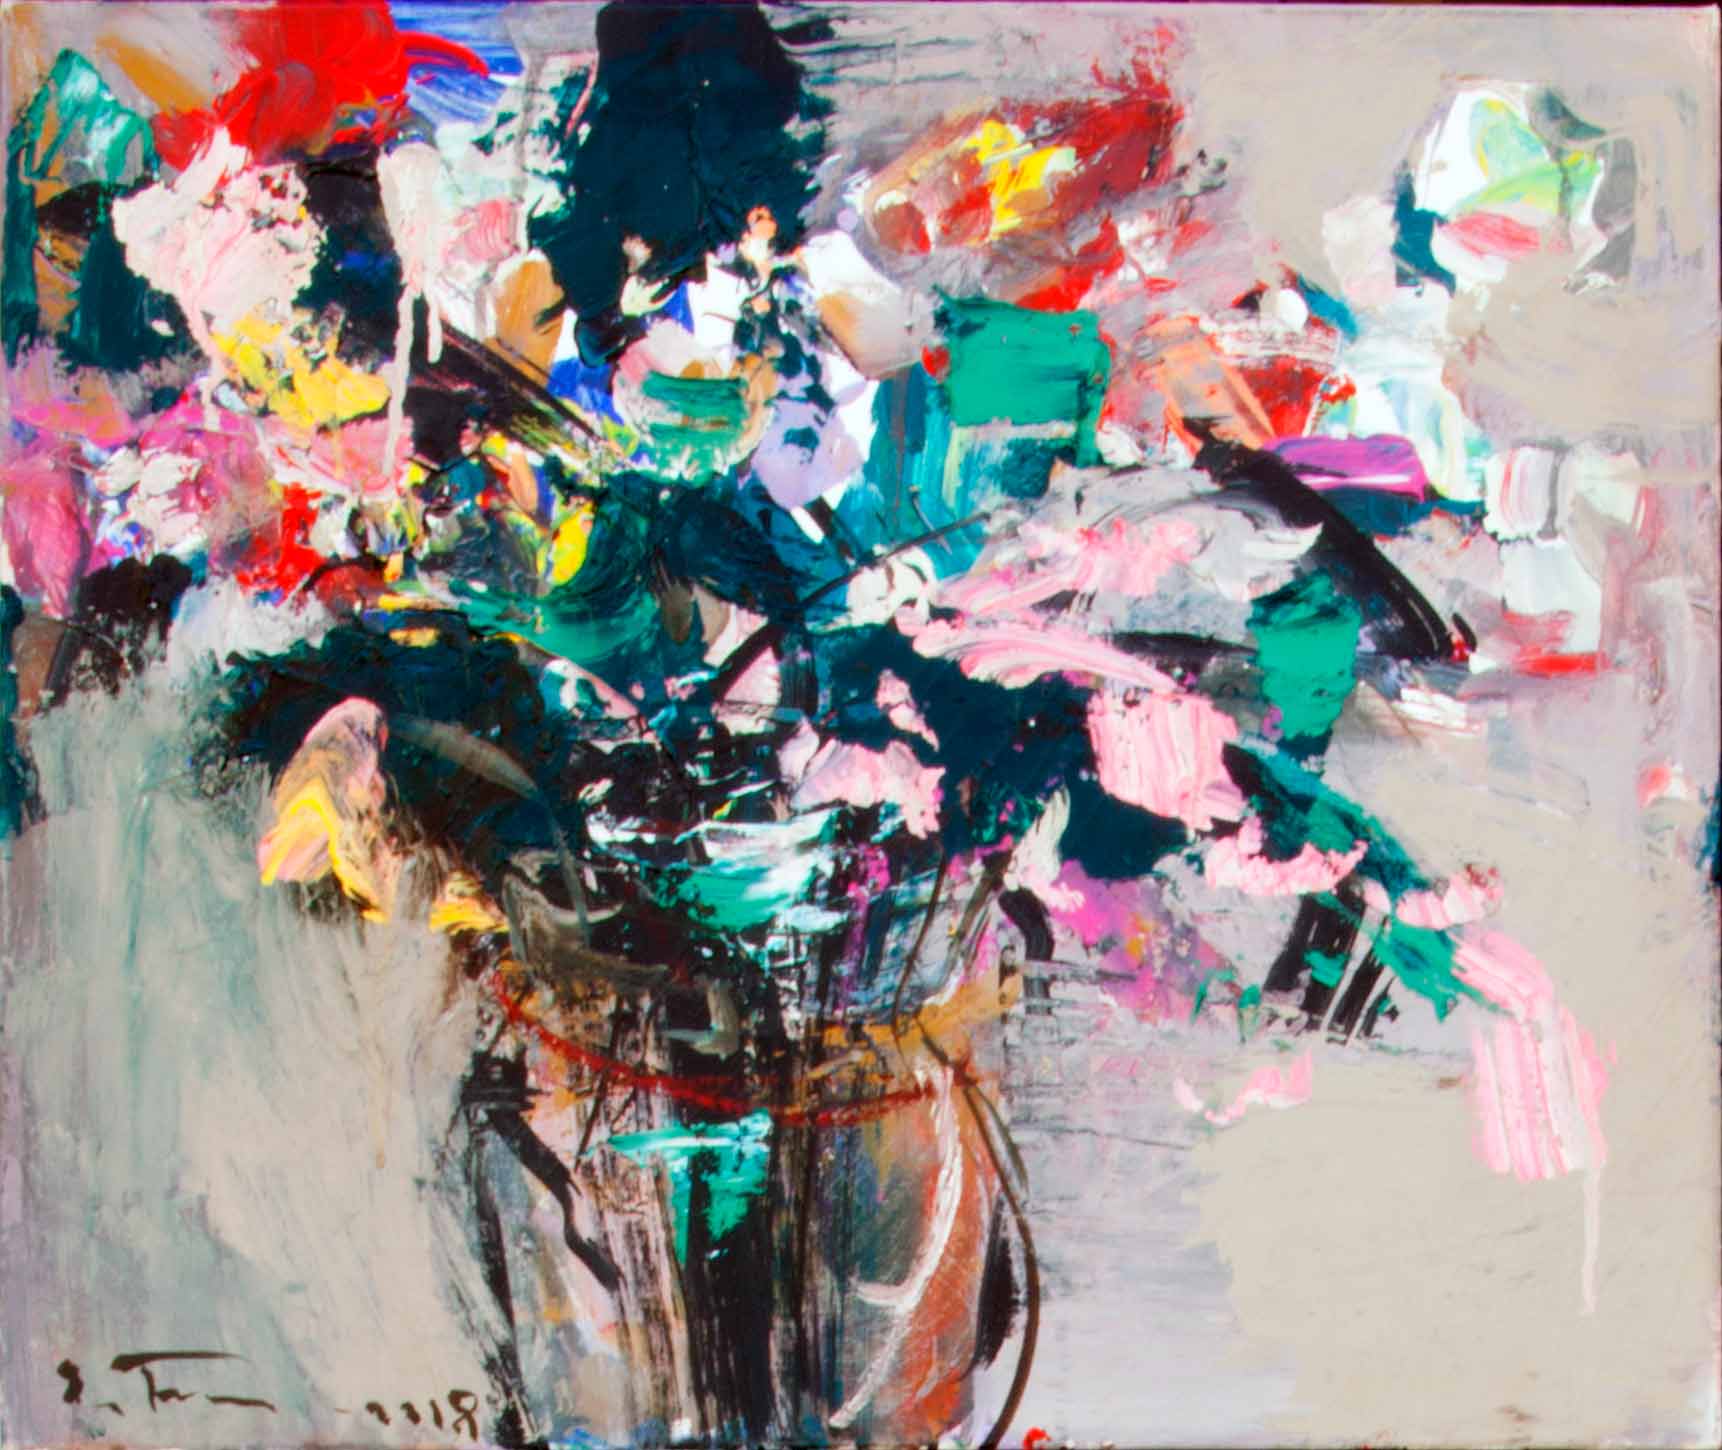 Original painting by Eduard Belsky. "Bouquet in a vase" Contemporary art in Satija Gallery